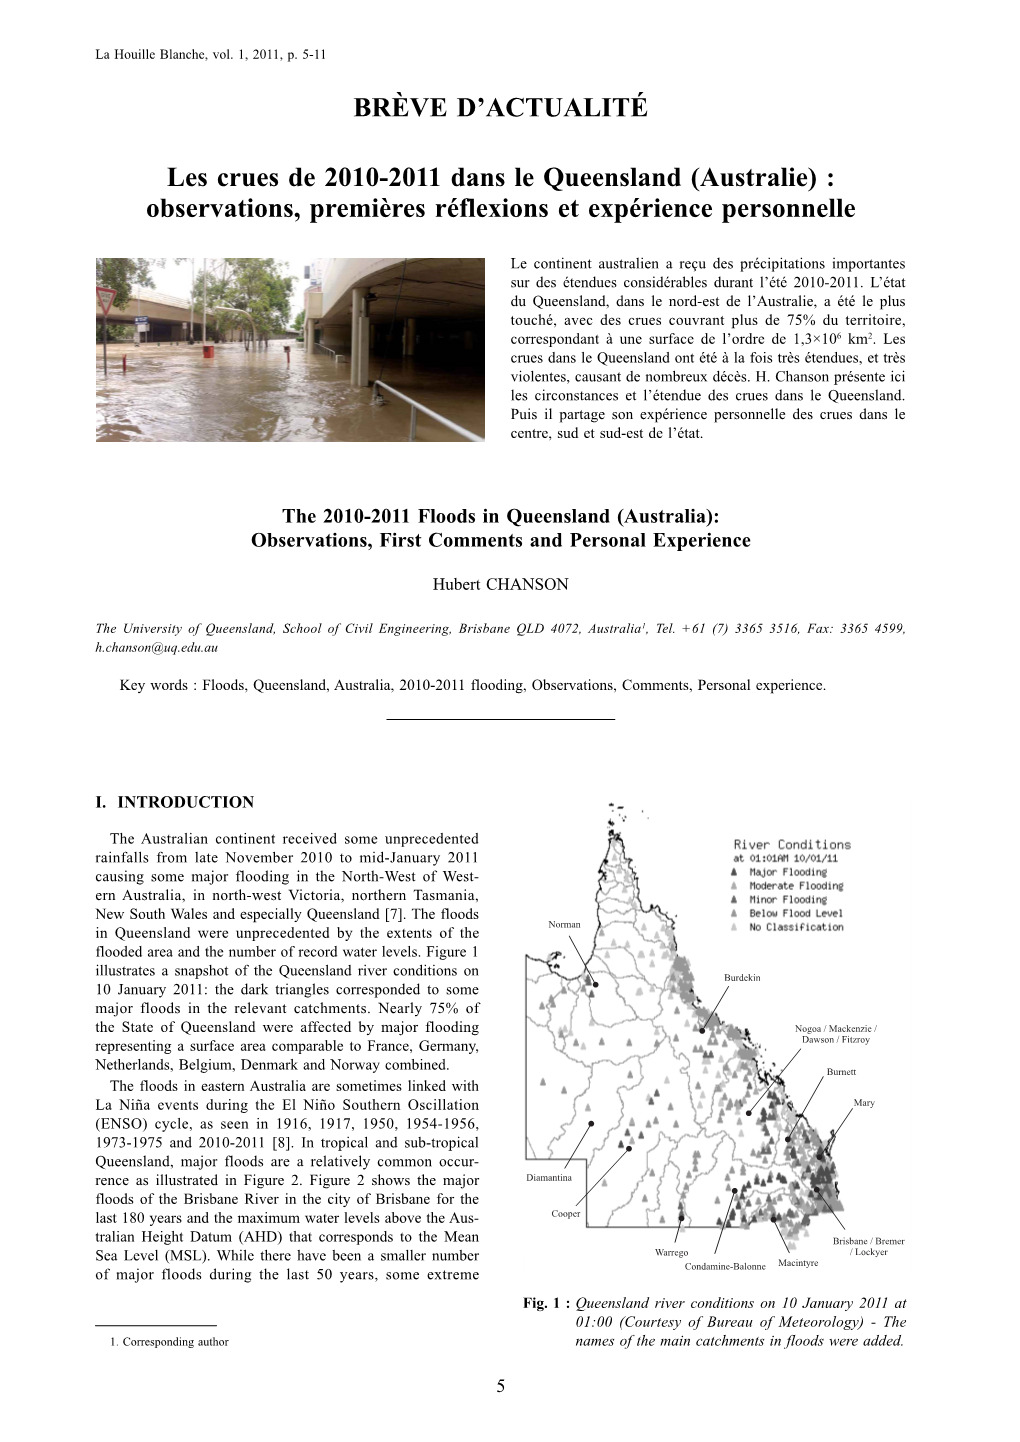 The 2010-2011 Floods in Queensland (Australia): Observations, First Comments and Personal Experience